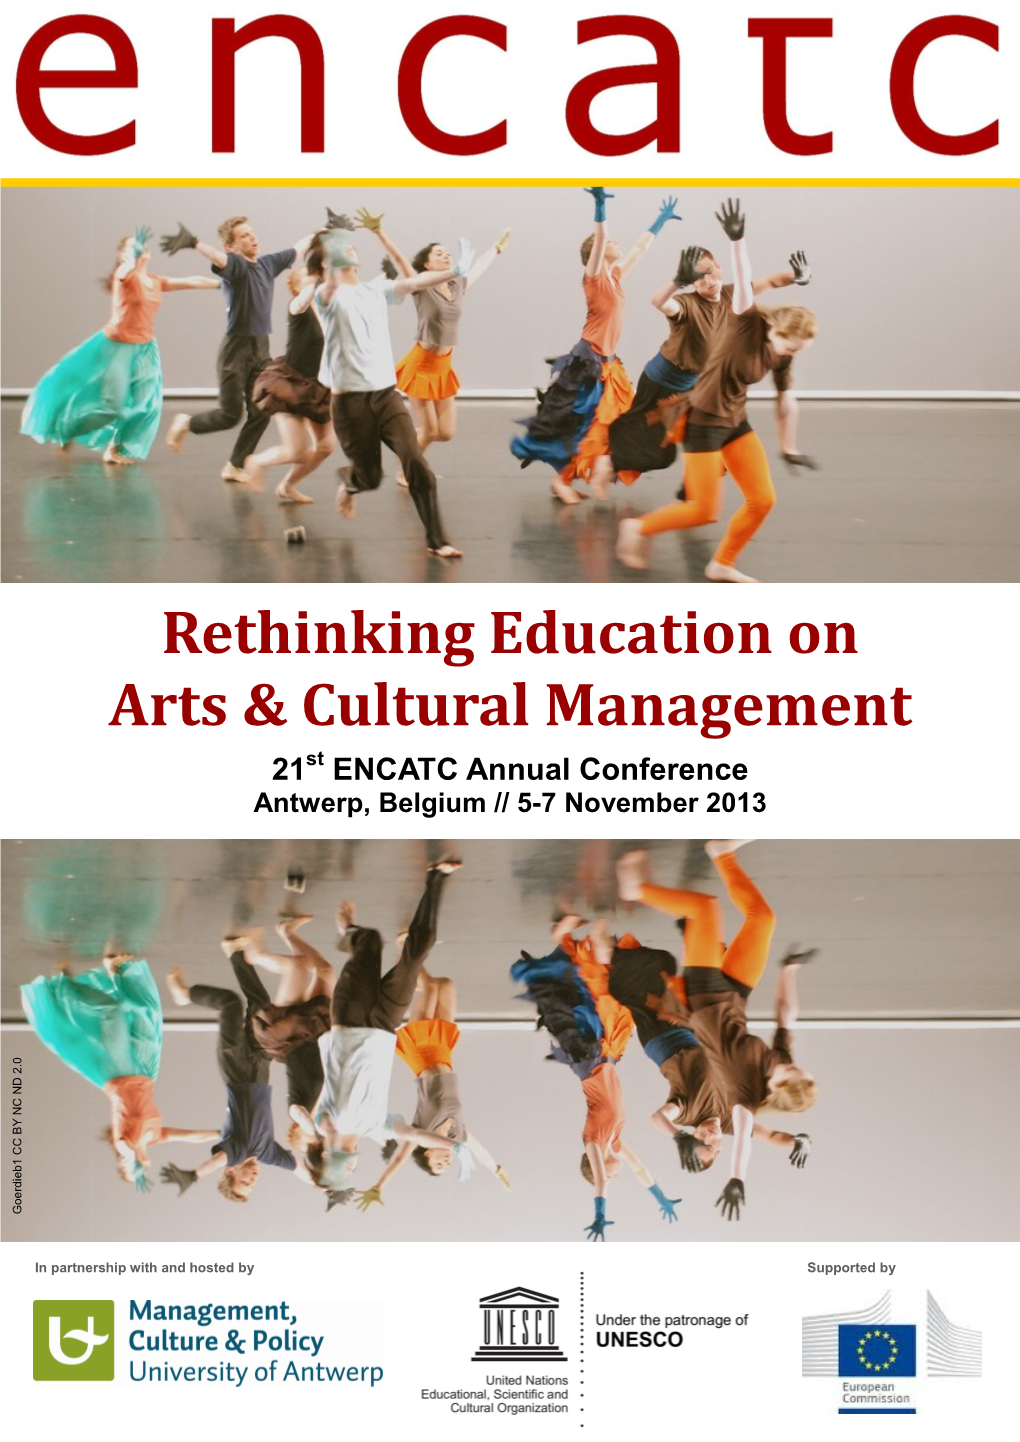 Rethinking Education on Arts & Cultural Management